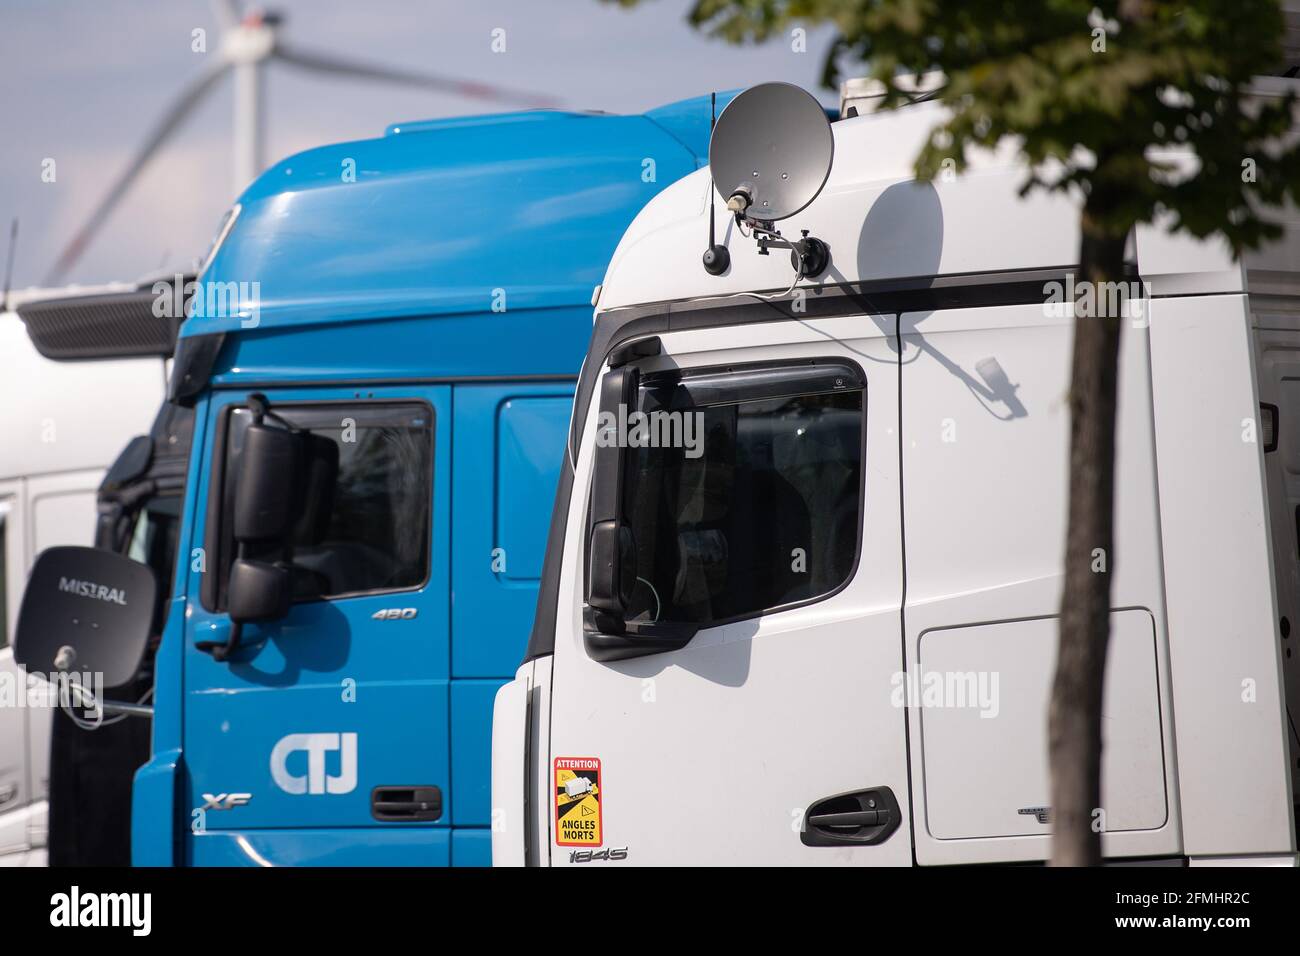 Worms, Germany. 02nd May, 2021. Trucks parked at a rest area on the 61 freeway. Credit: Sebastian Gollnow/dpa/Alamy Live News Stock Photo